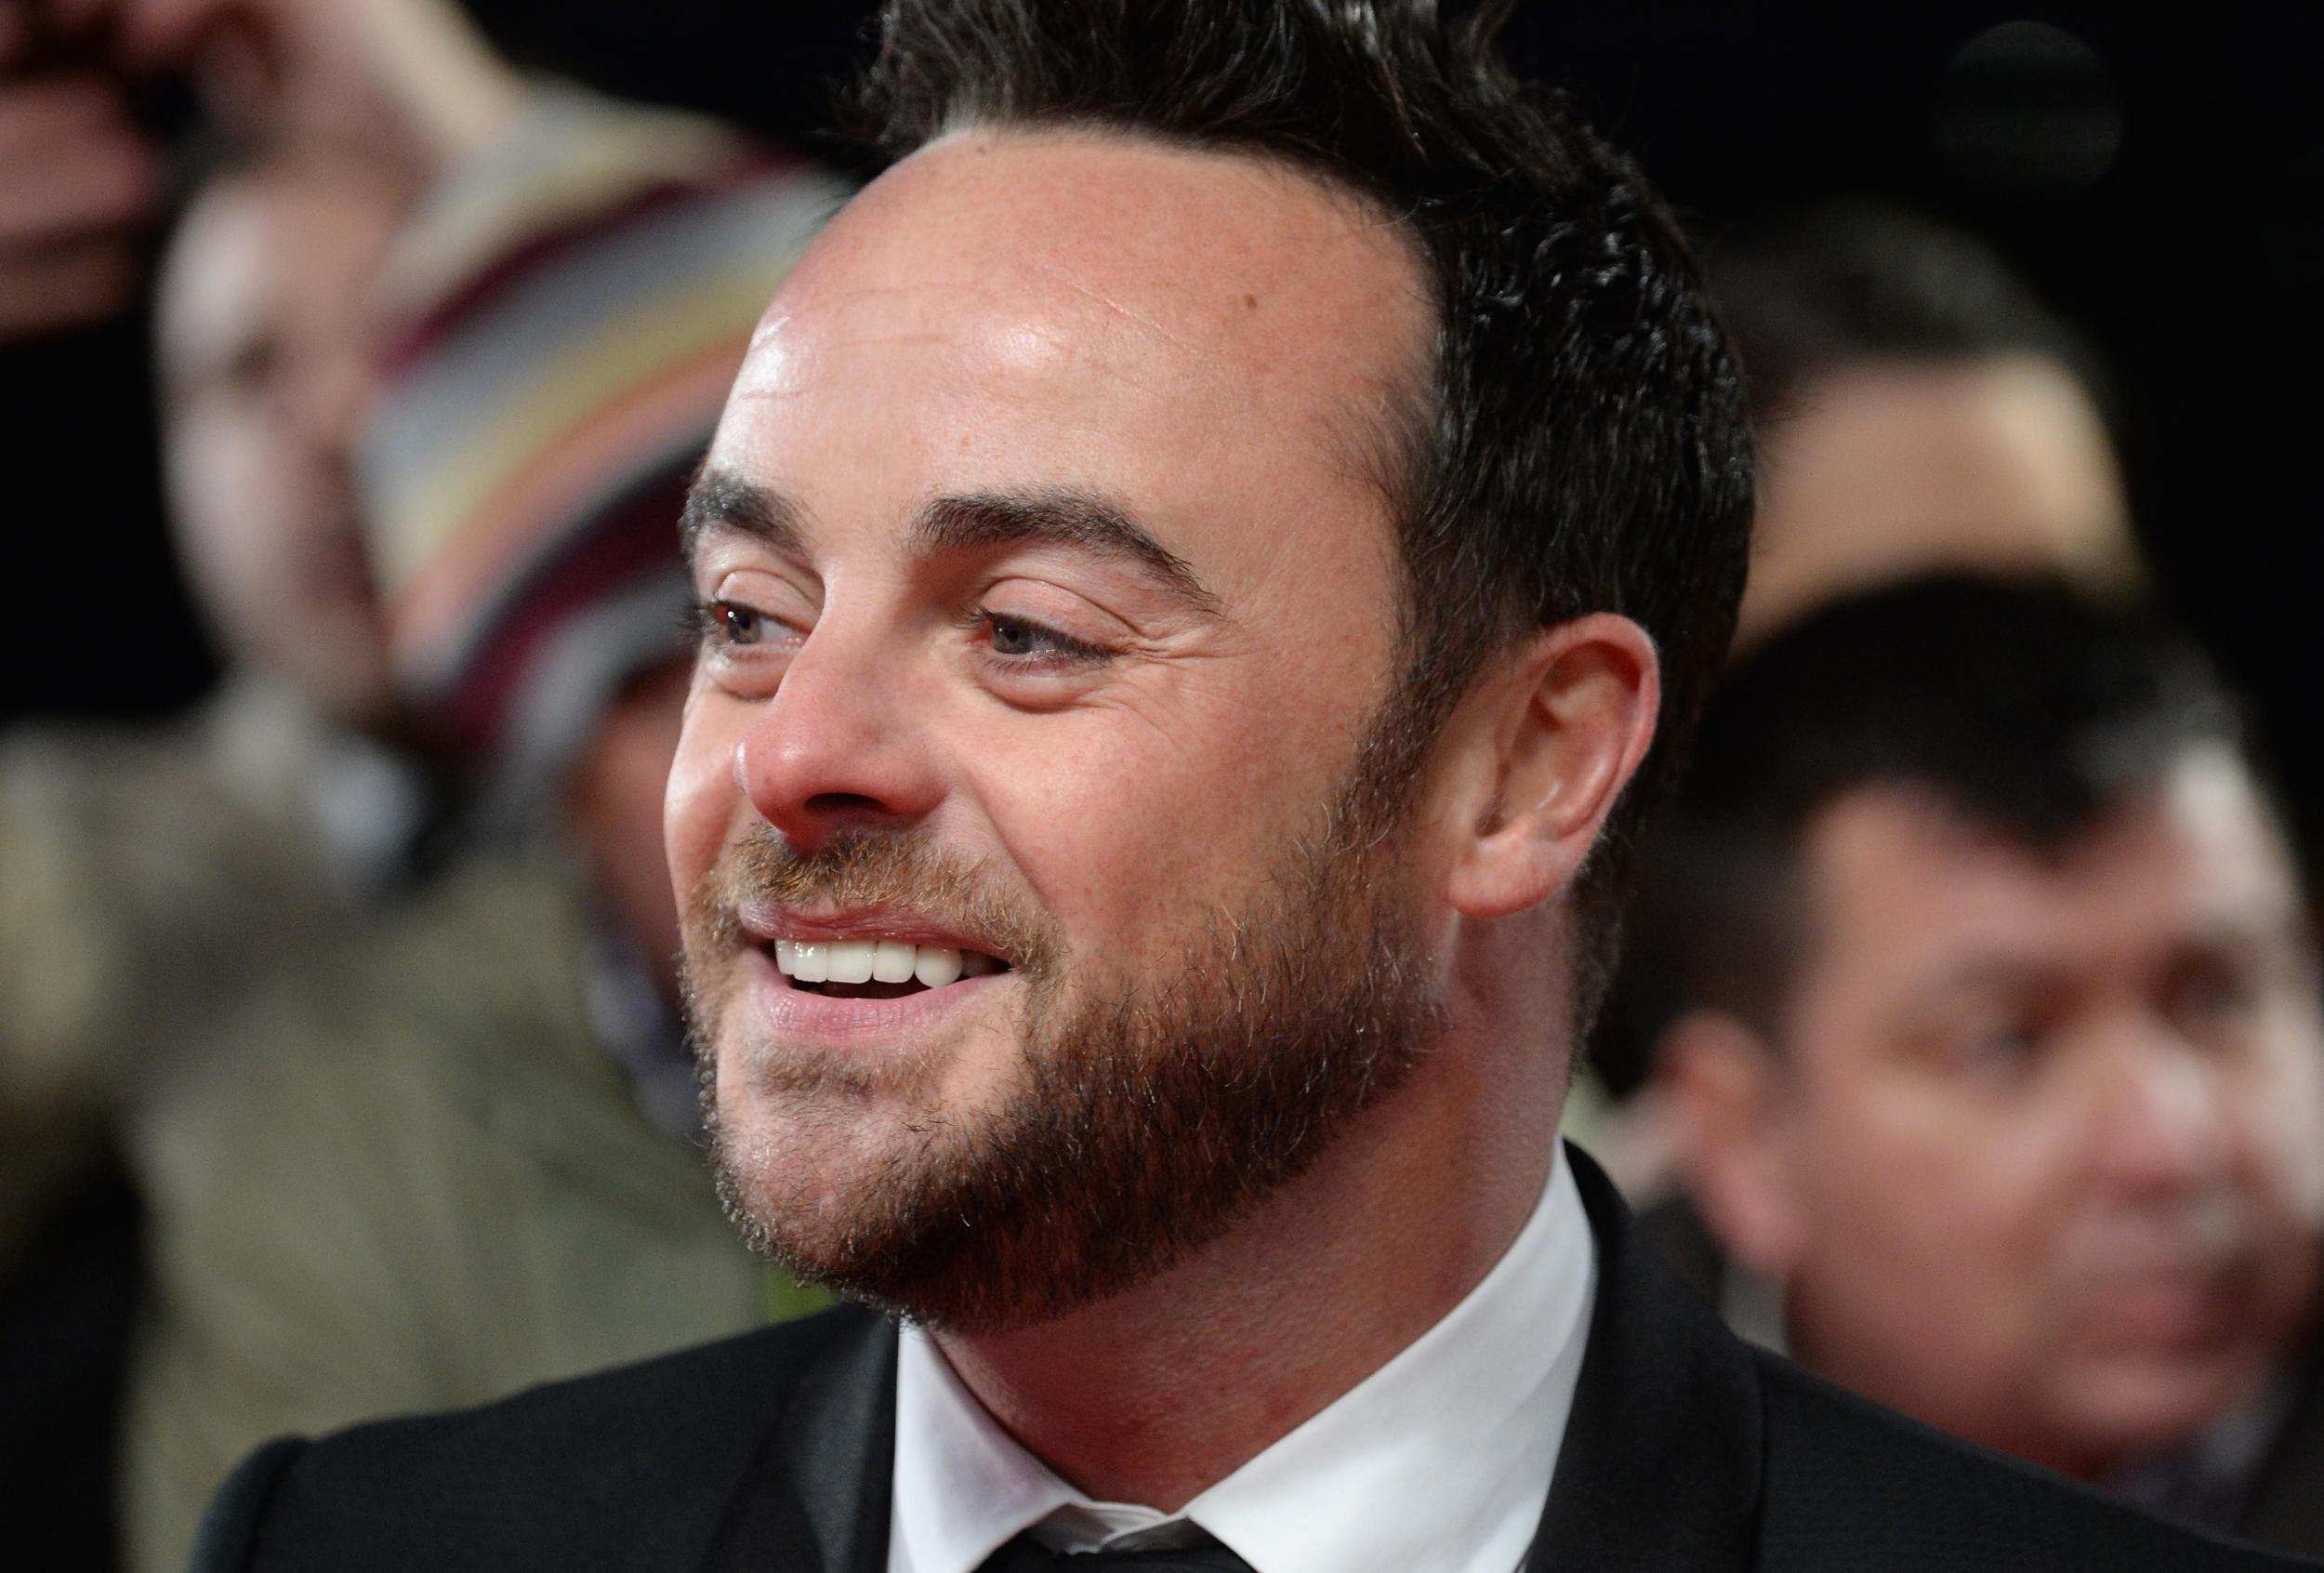 Ant McPartlin of the duo Ant & Dec